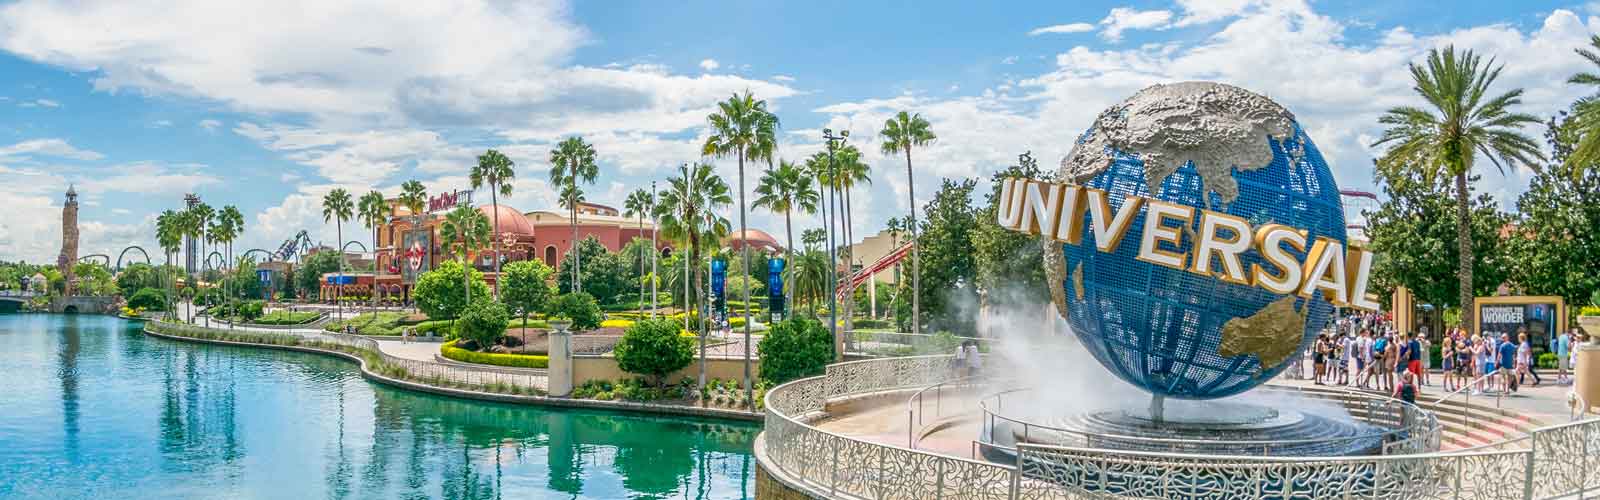 universal studios vacation packages deals